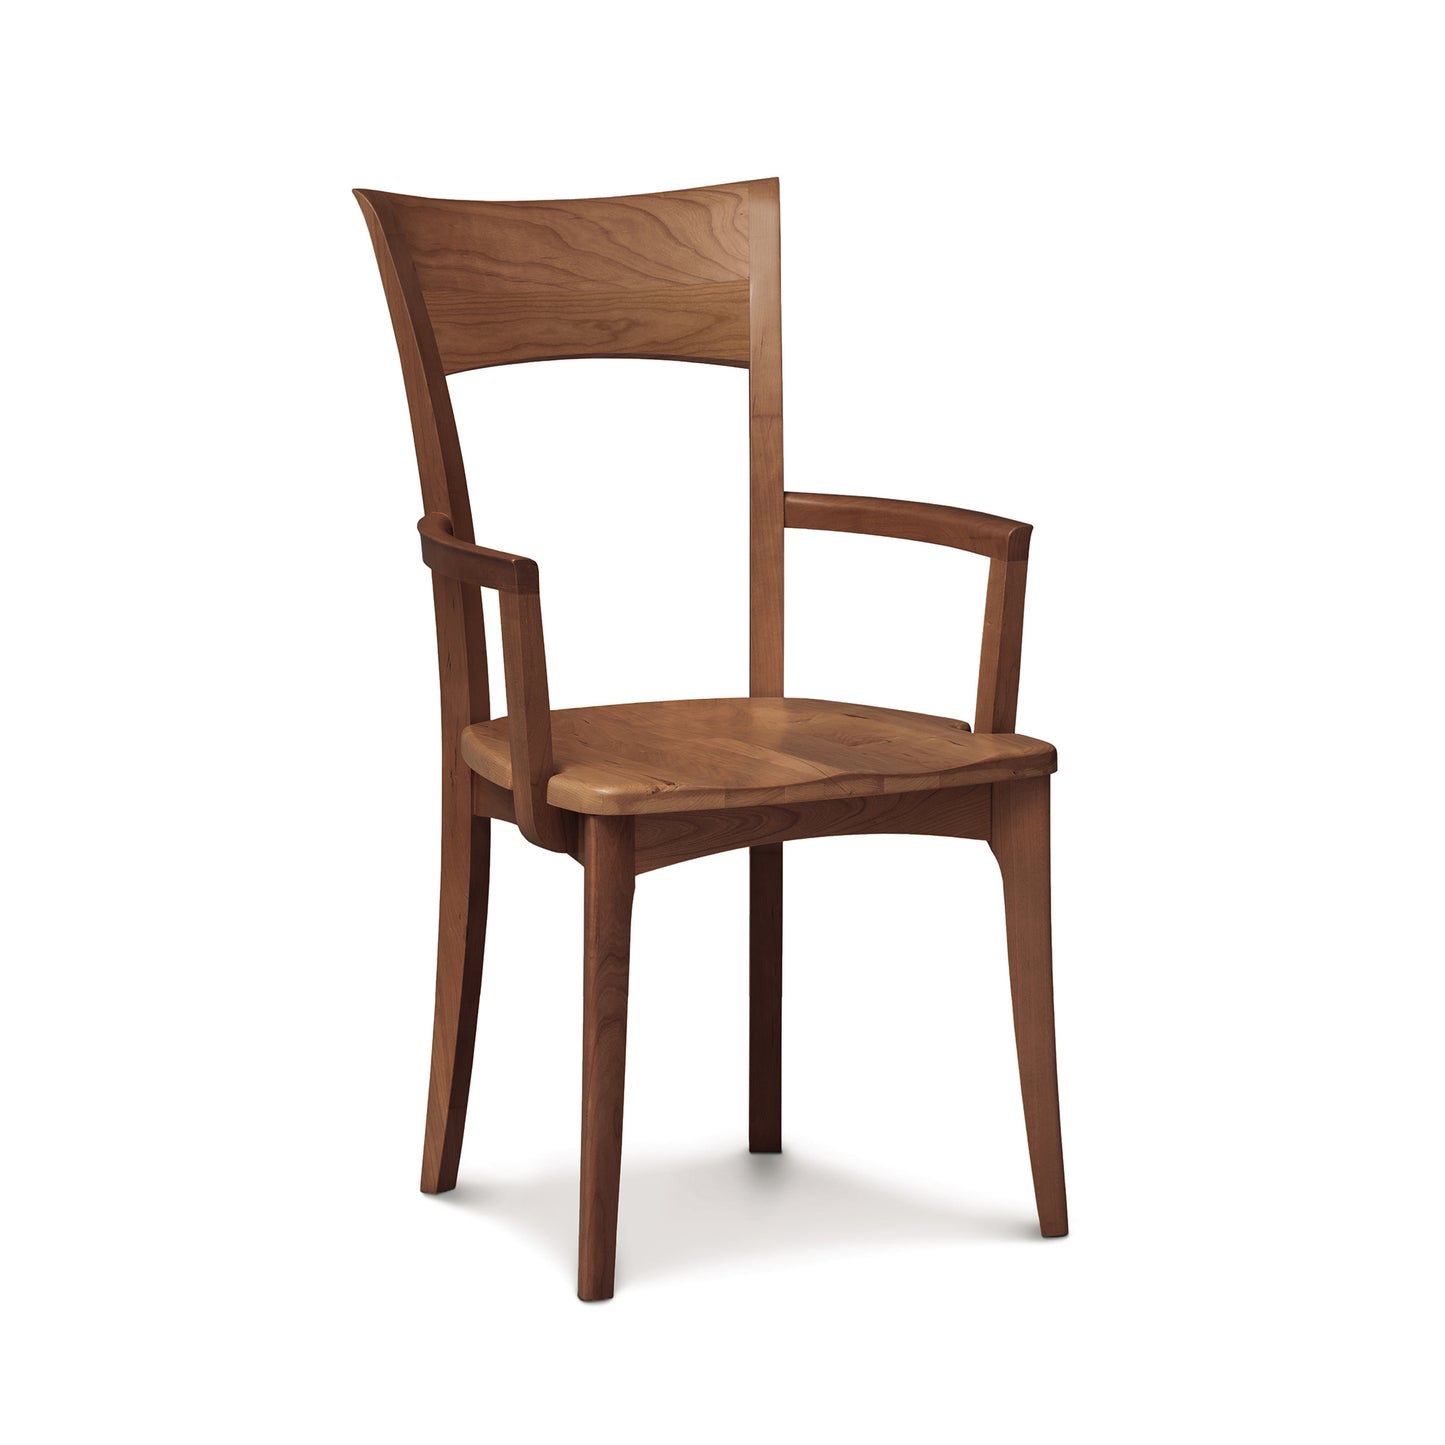 A Copeland Furniture Ingrid Shaker Chair with Wood Seat with armrests against a white background.